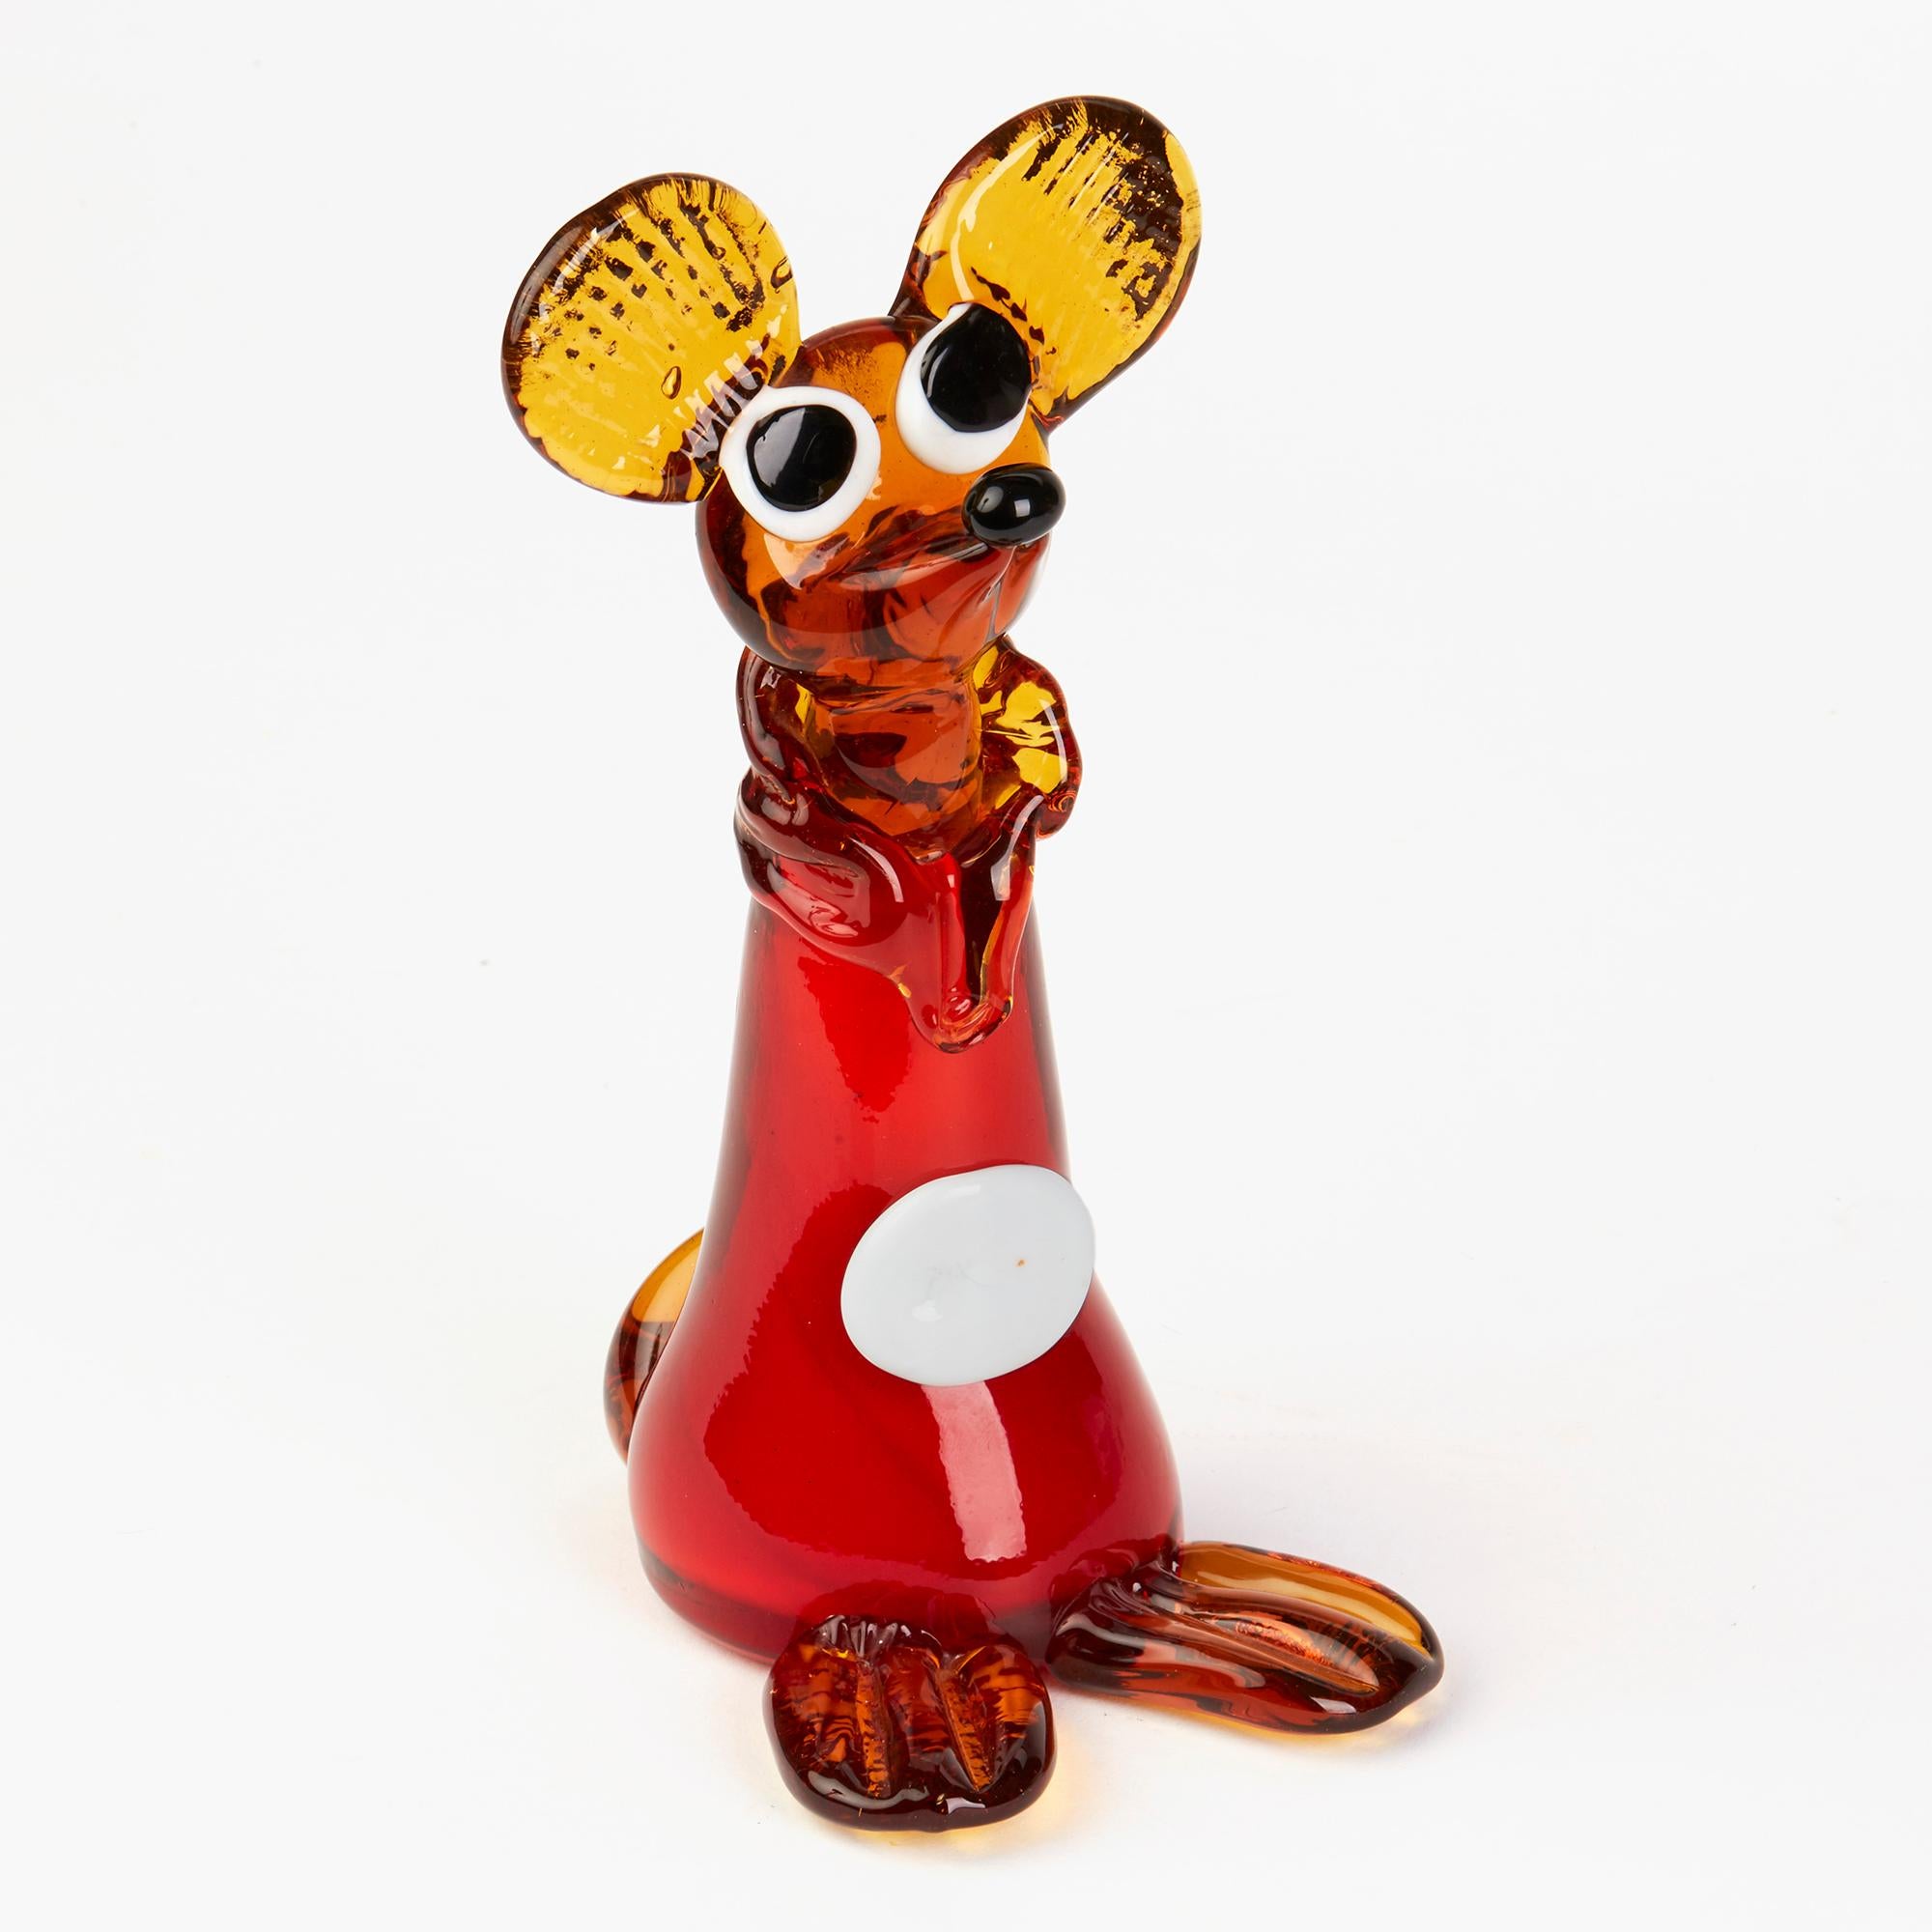 A delightful vintage Italian Murano novelty glass mouse figure standing wearing a long 'robe' in red cased in amber glass with a large white button with large amber glass feet, tail and head with a black glass nose and black on white glass eyes